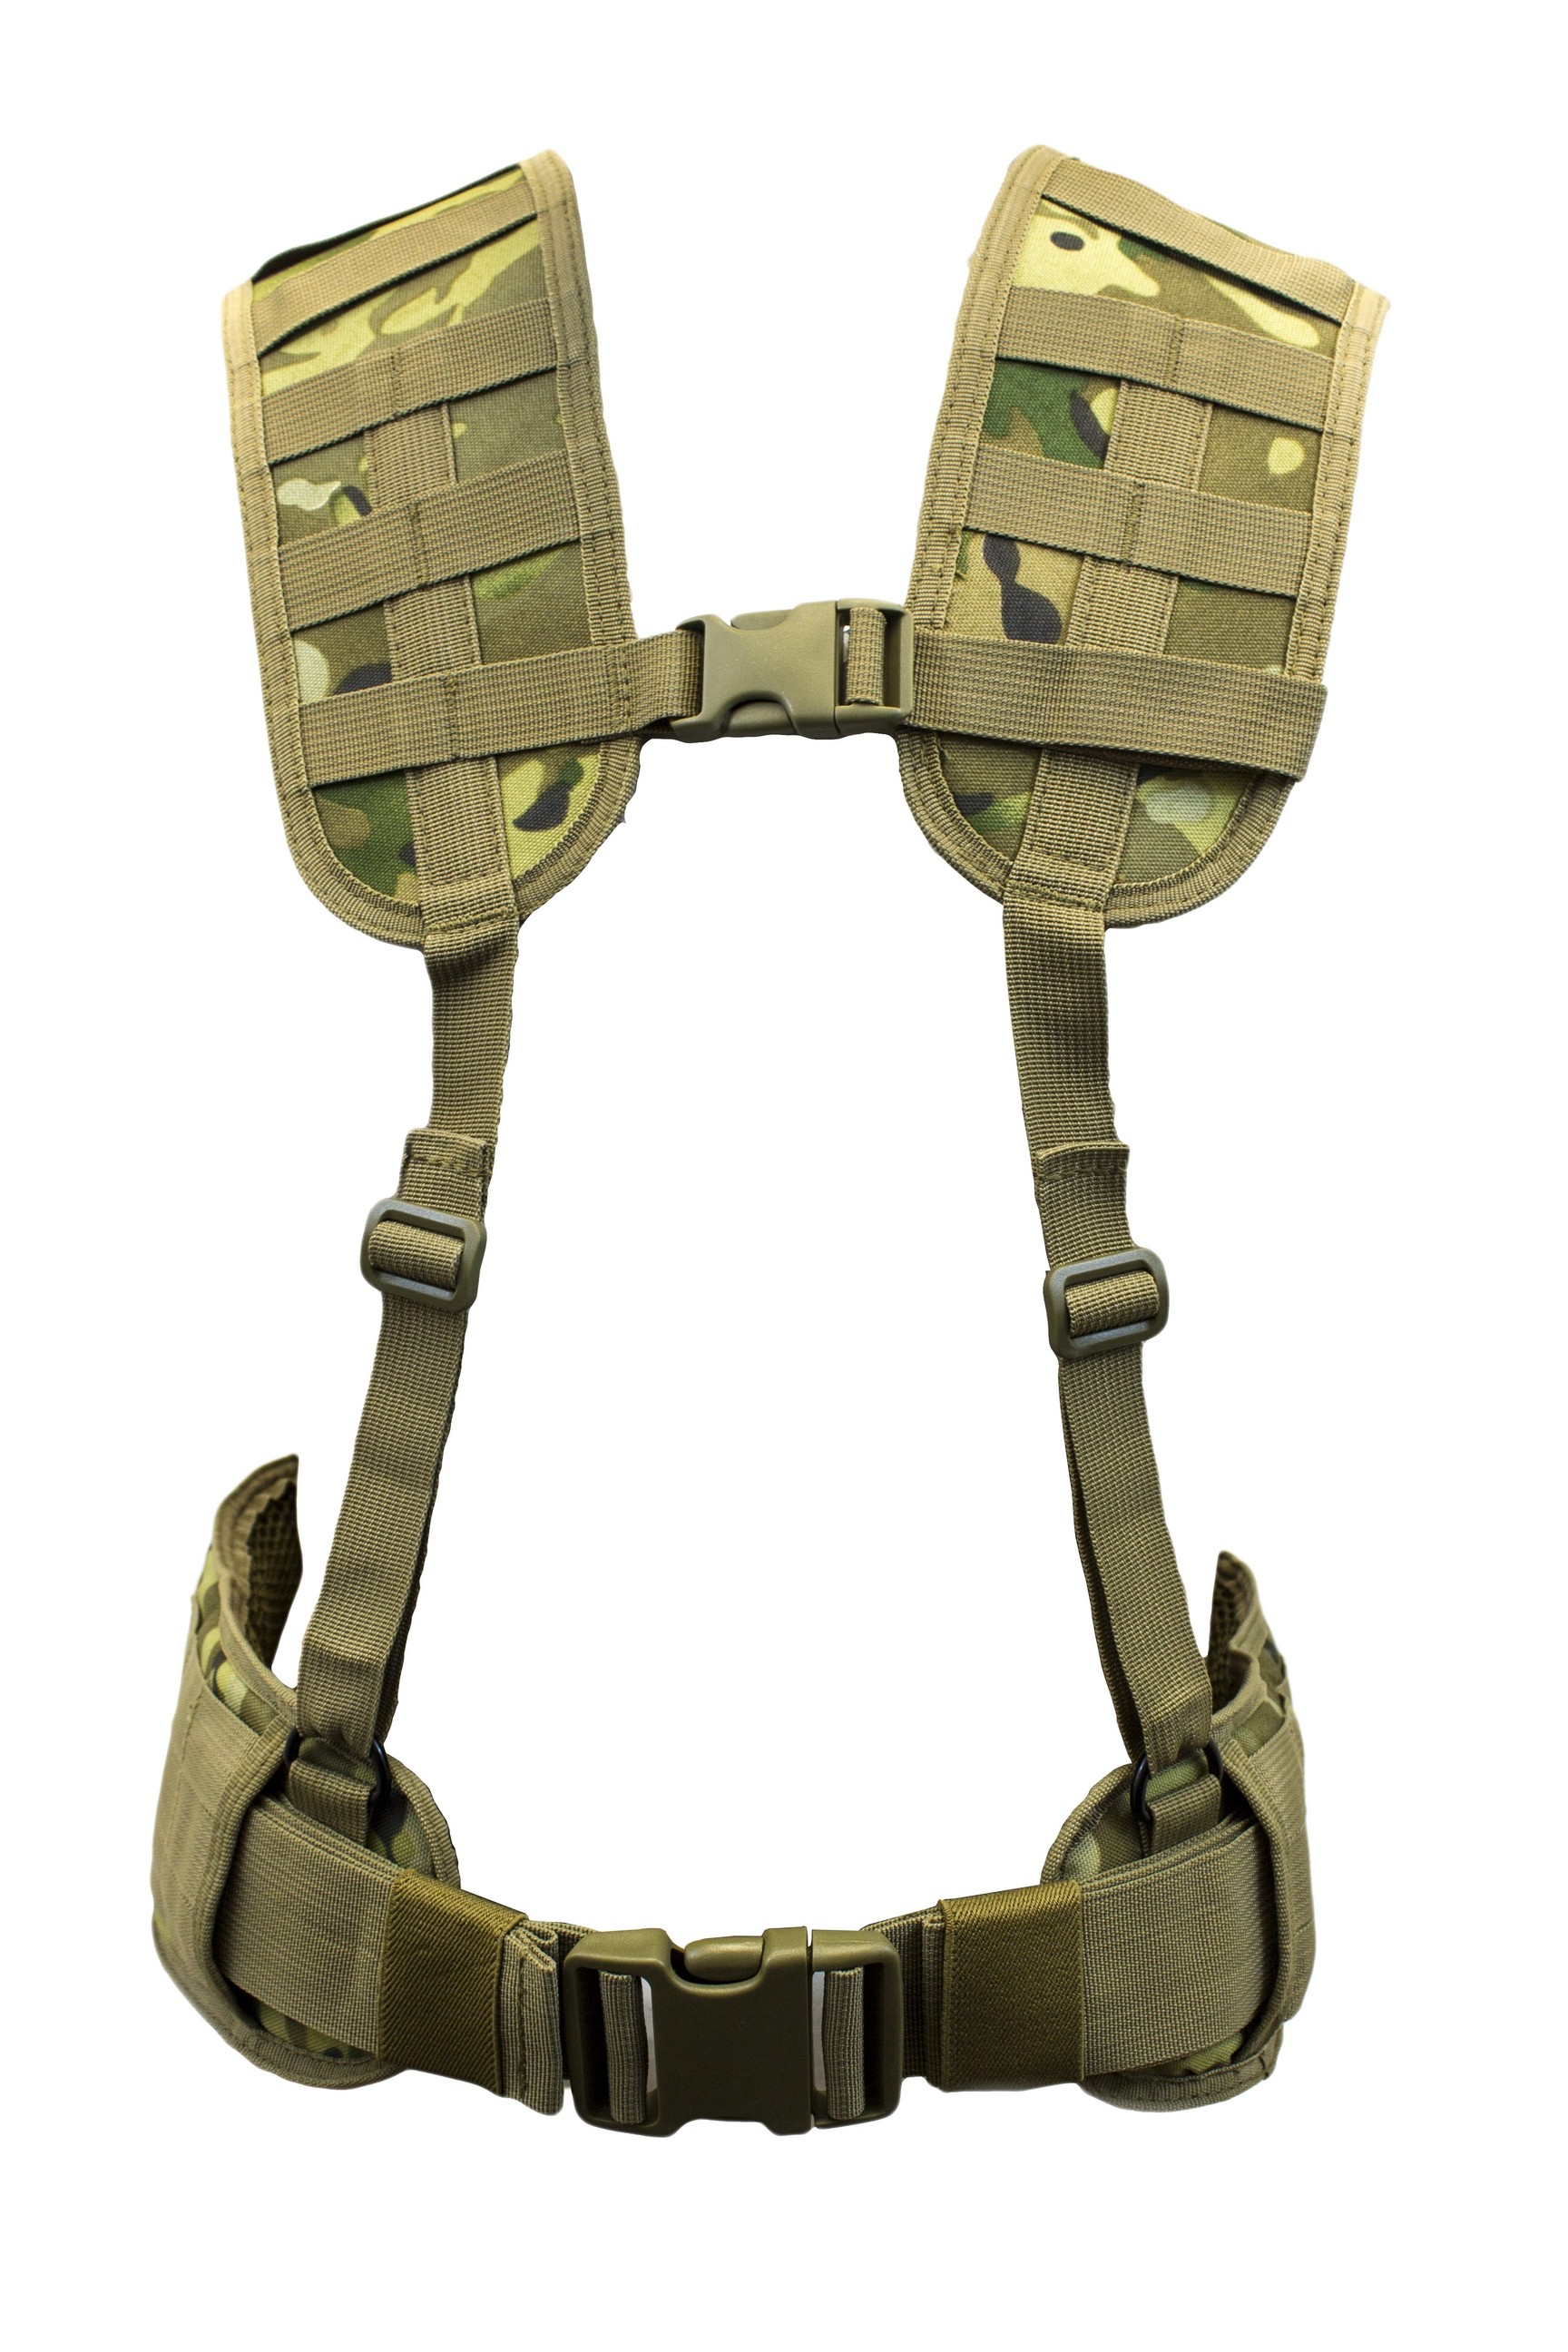 NP PMC MOLLE Harness - NP Camo | Super5ives